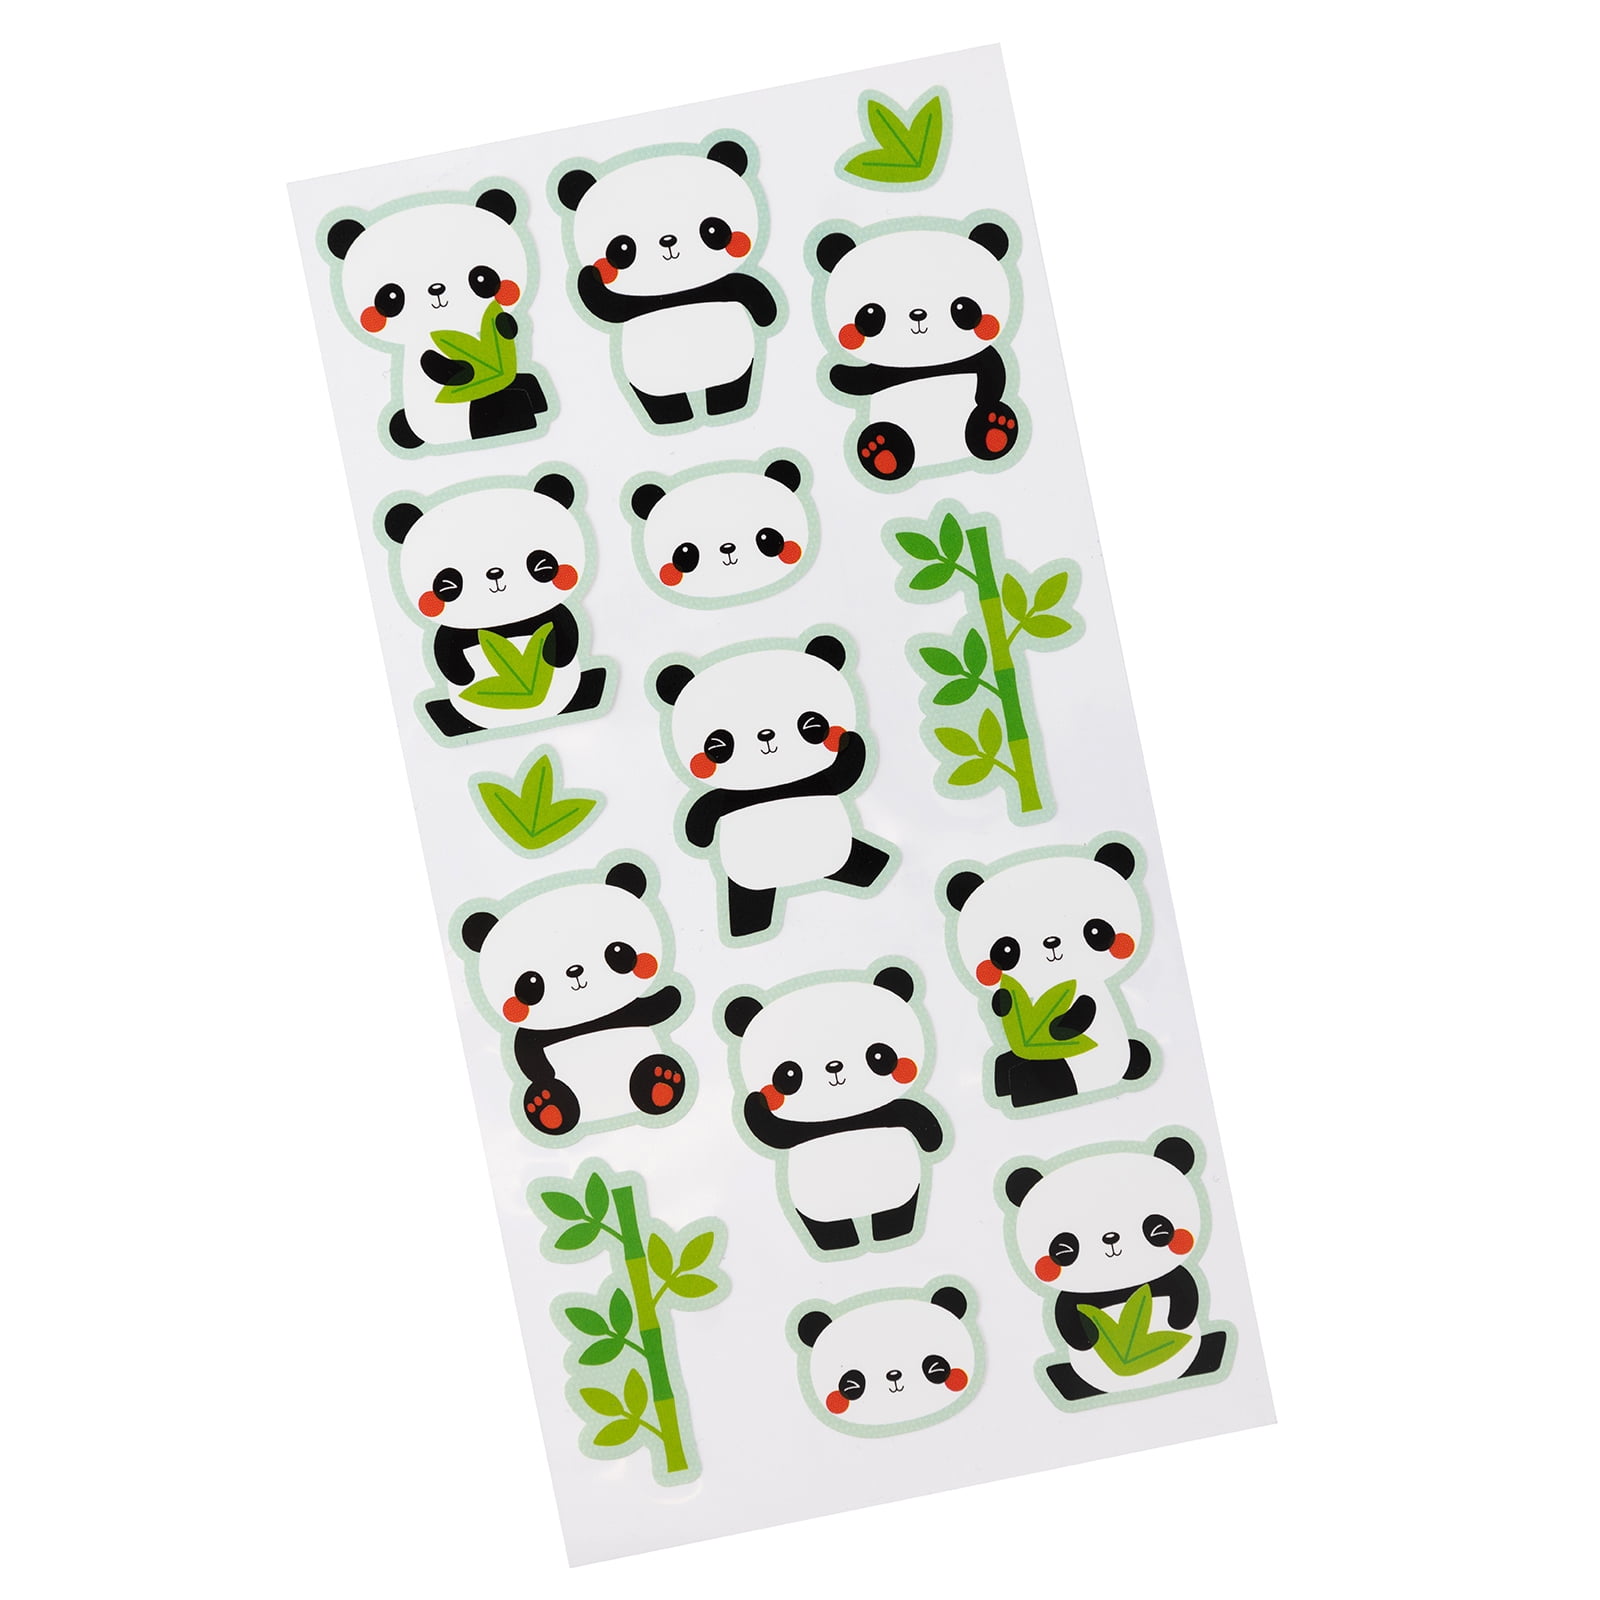 4 Packs Panda Puffy Stickers for DIY Craft Decoration 4 Packs EX Thick